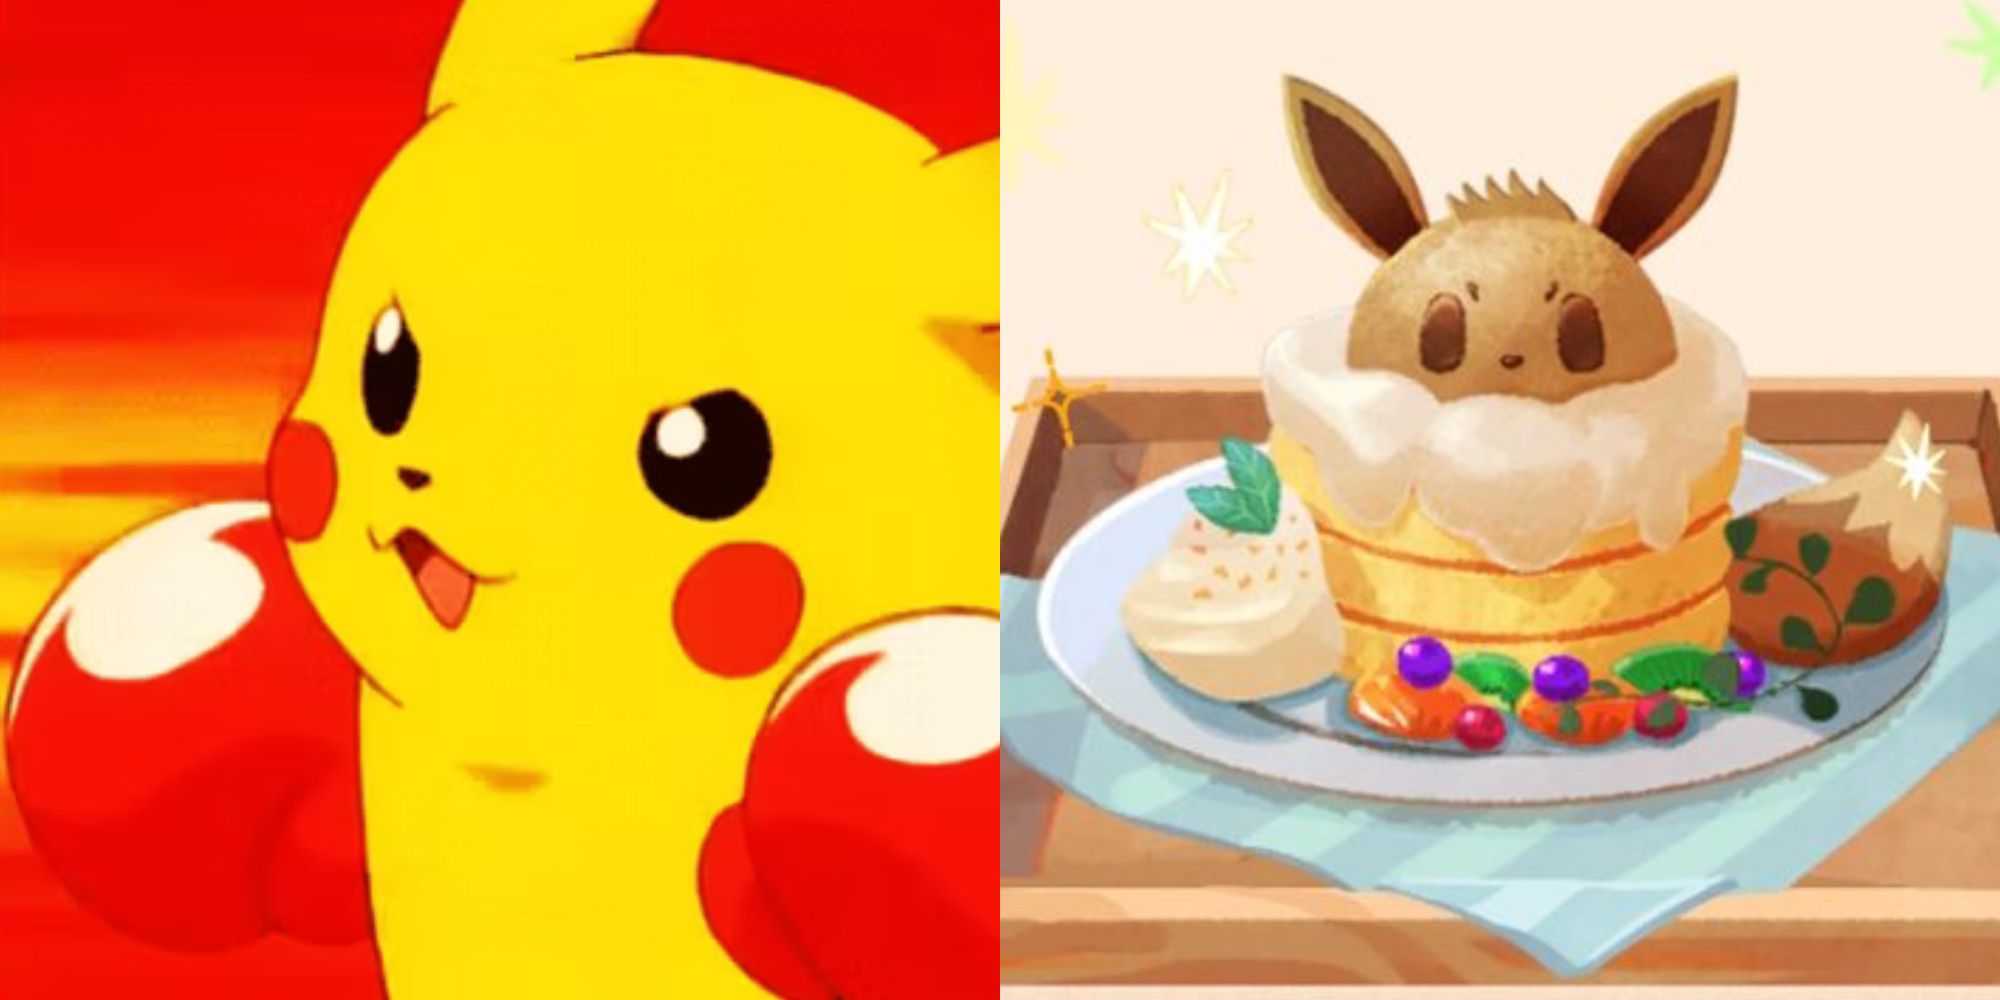 pokemon life apps featured image with boxing pikachu and eevee cake